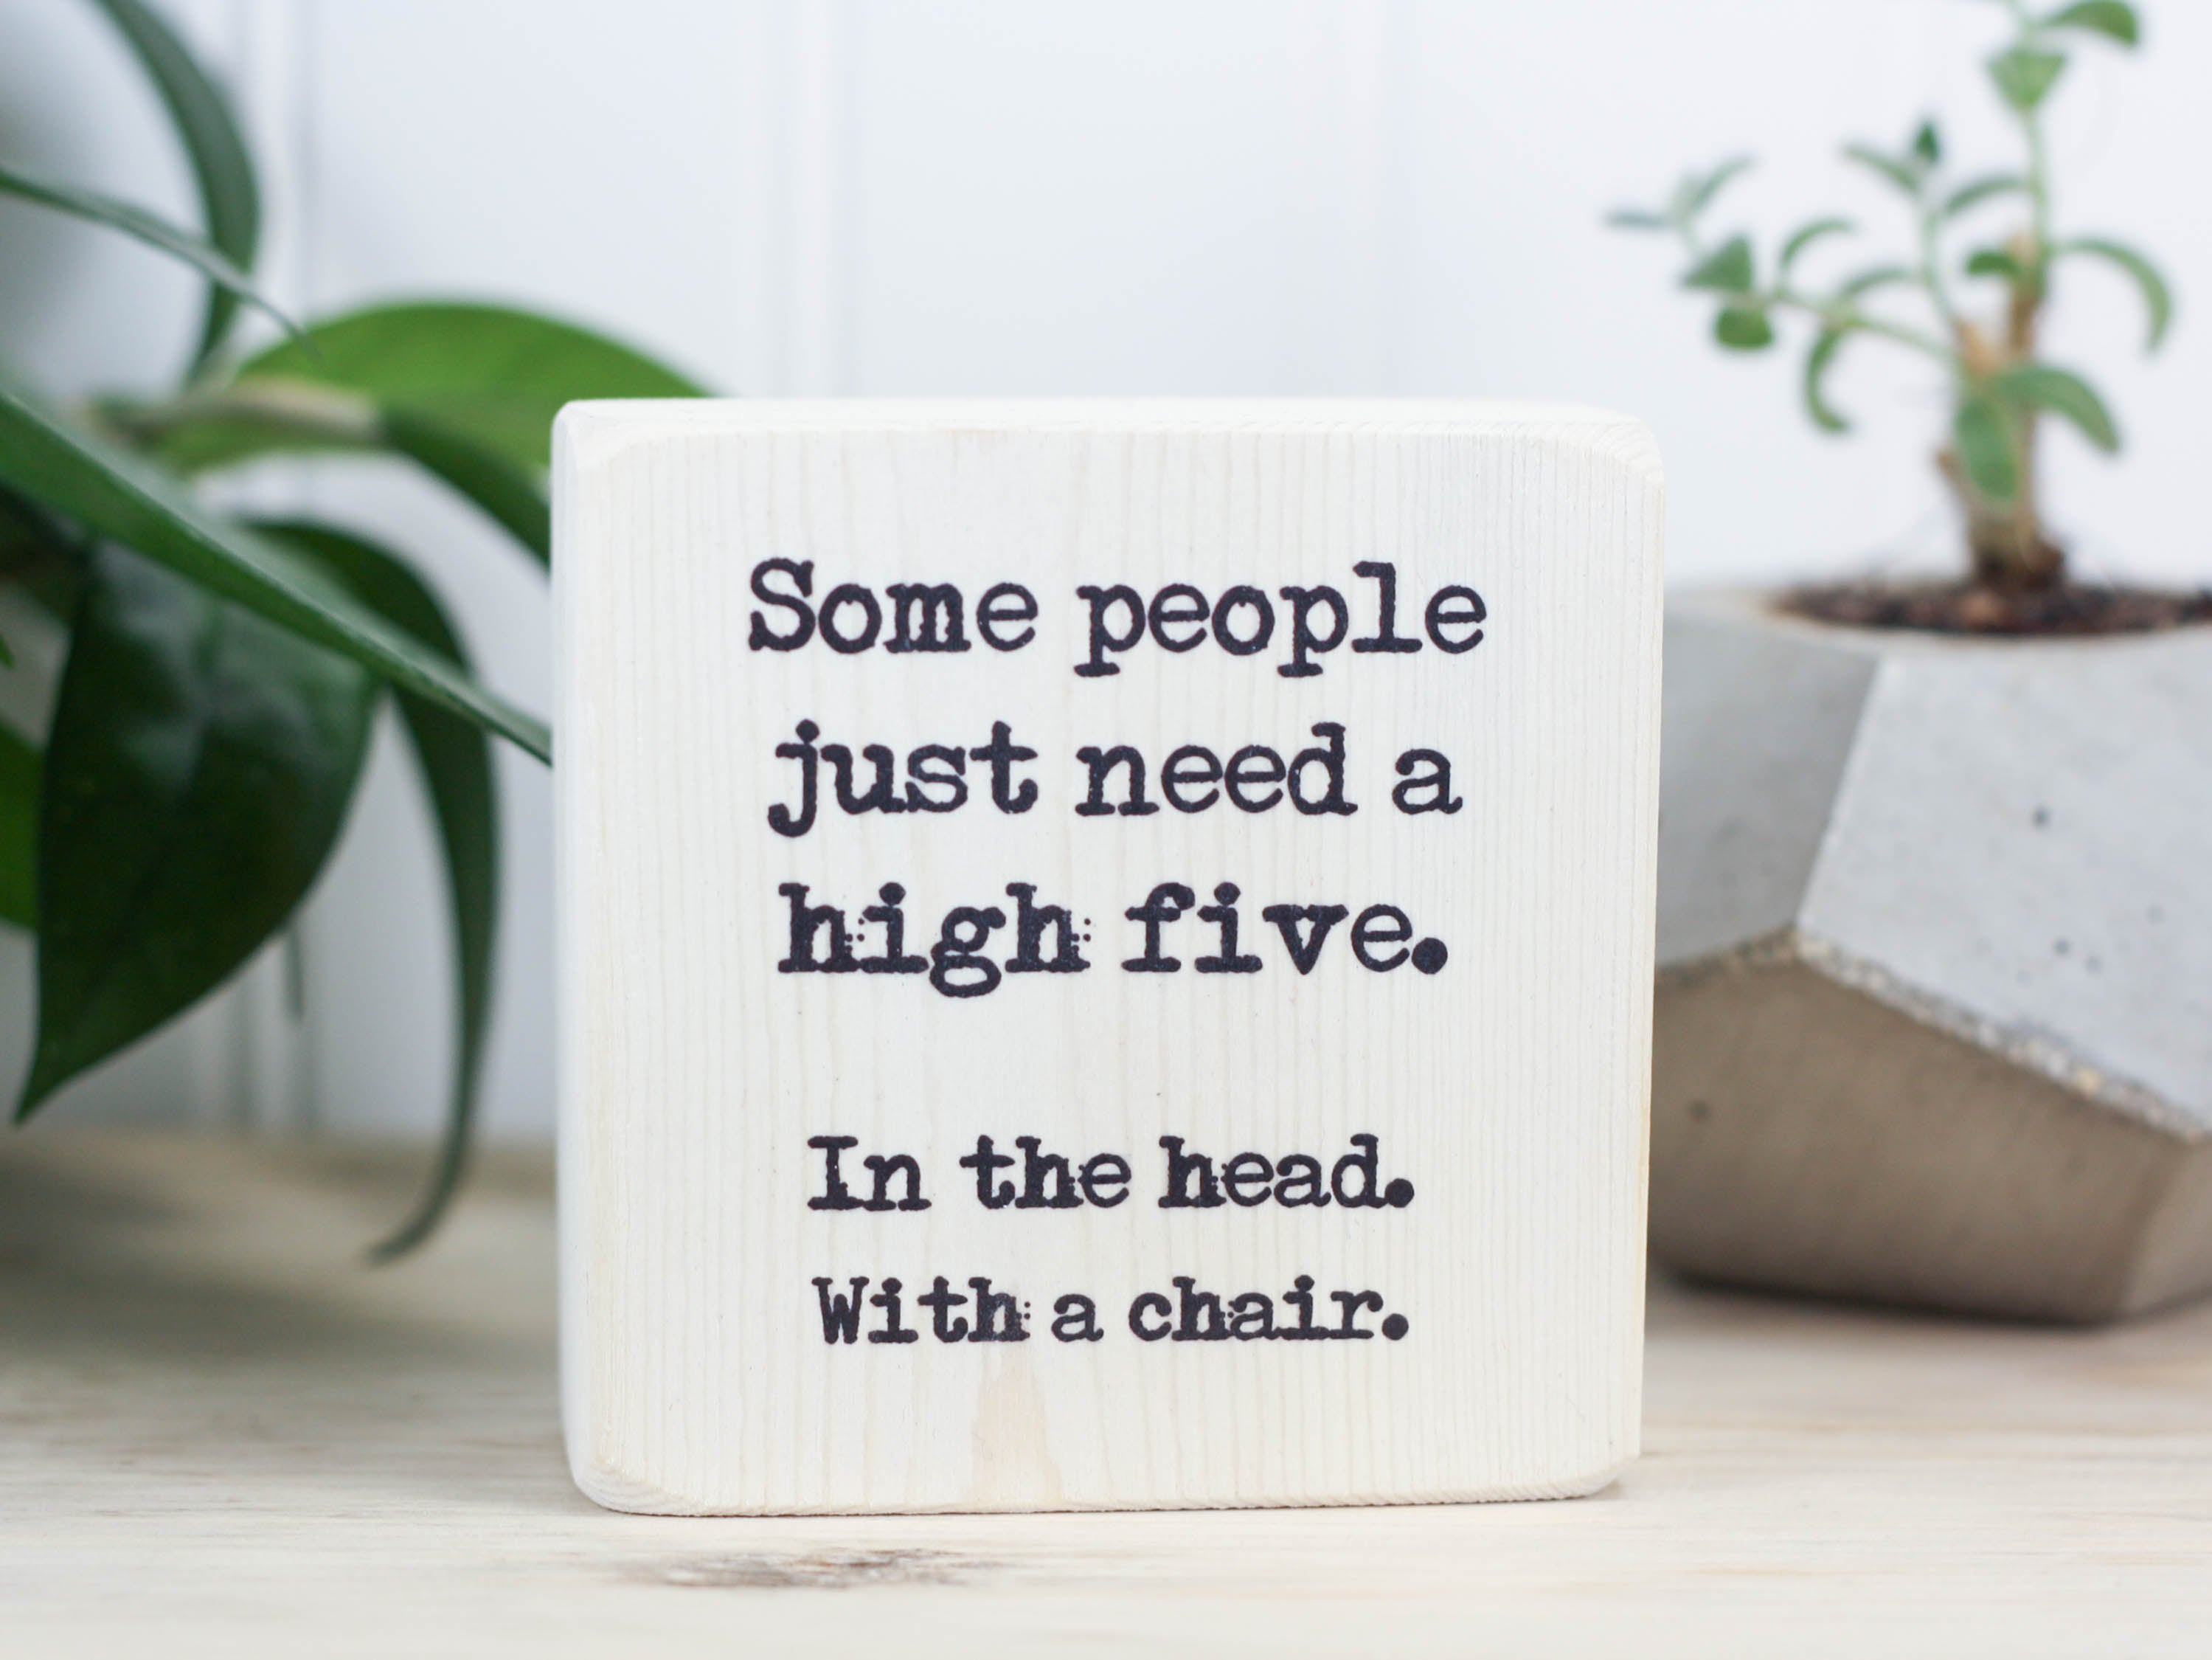 Small wood funny sign in whitewash with the saying "Some people just need a high five. In the head. With a chair."